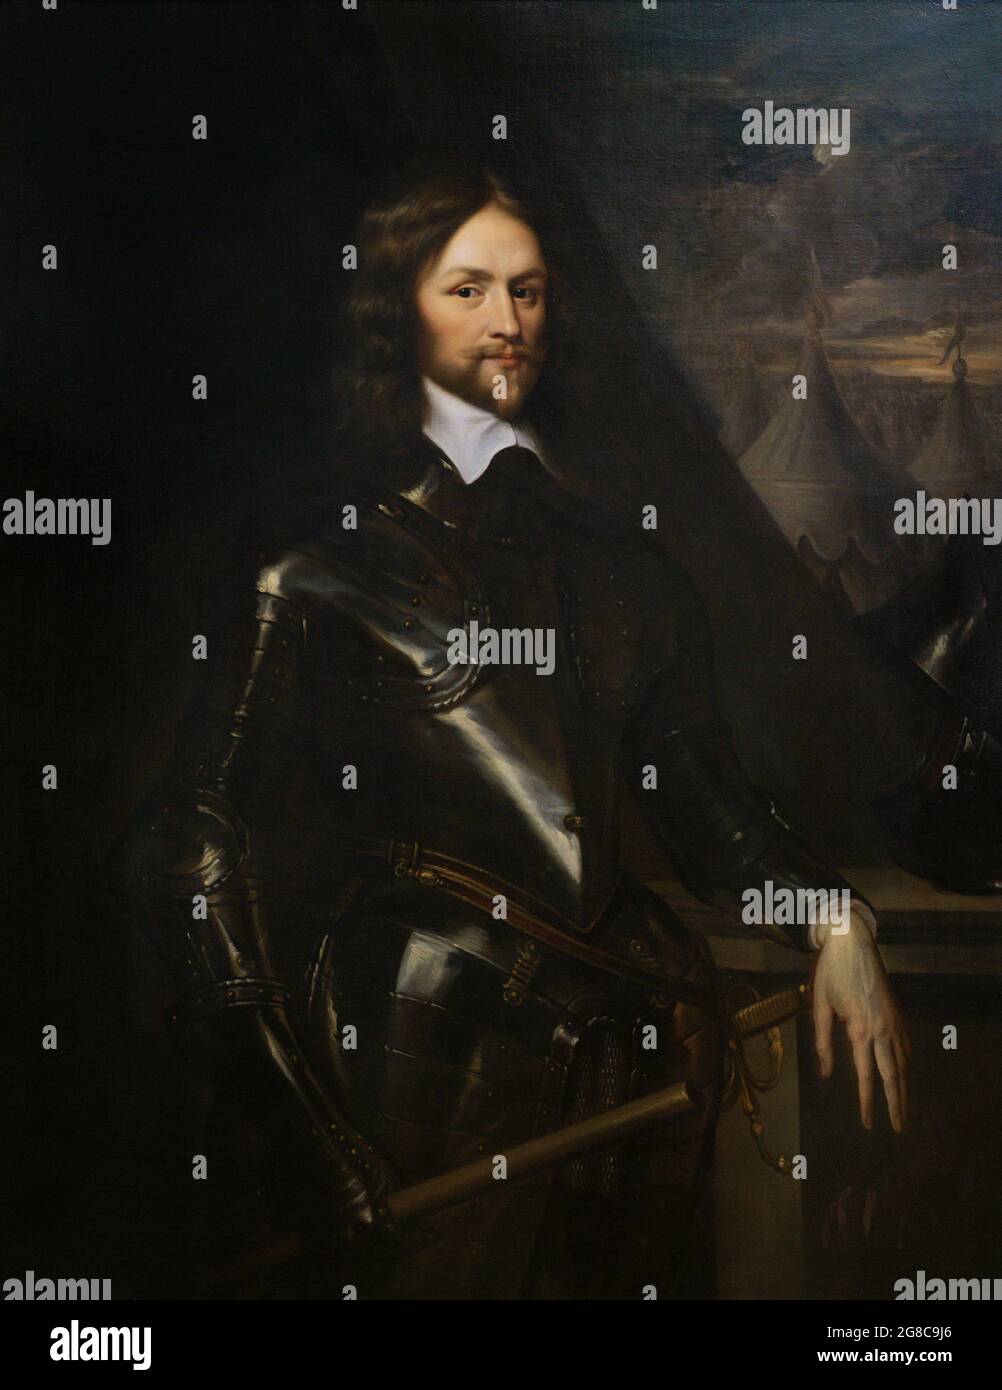 Henry Ireton (1611-1651). English statesman and Parliamentary general during the Civil Wars between the Royalists and Parliamentarians. Copy attributed to Robert Walker (1599-1658) after a portrait of Samuel Cooper, and Anthony van Dyck. Oil on canvas (124,5 x 100,3 cm), ca.1650. National Portrait Gallery. London, England, United Kingdom. Stock Photo